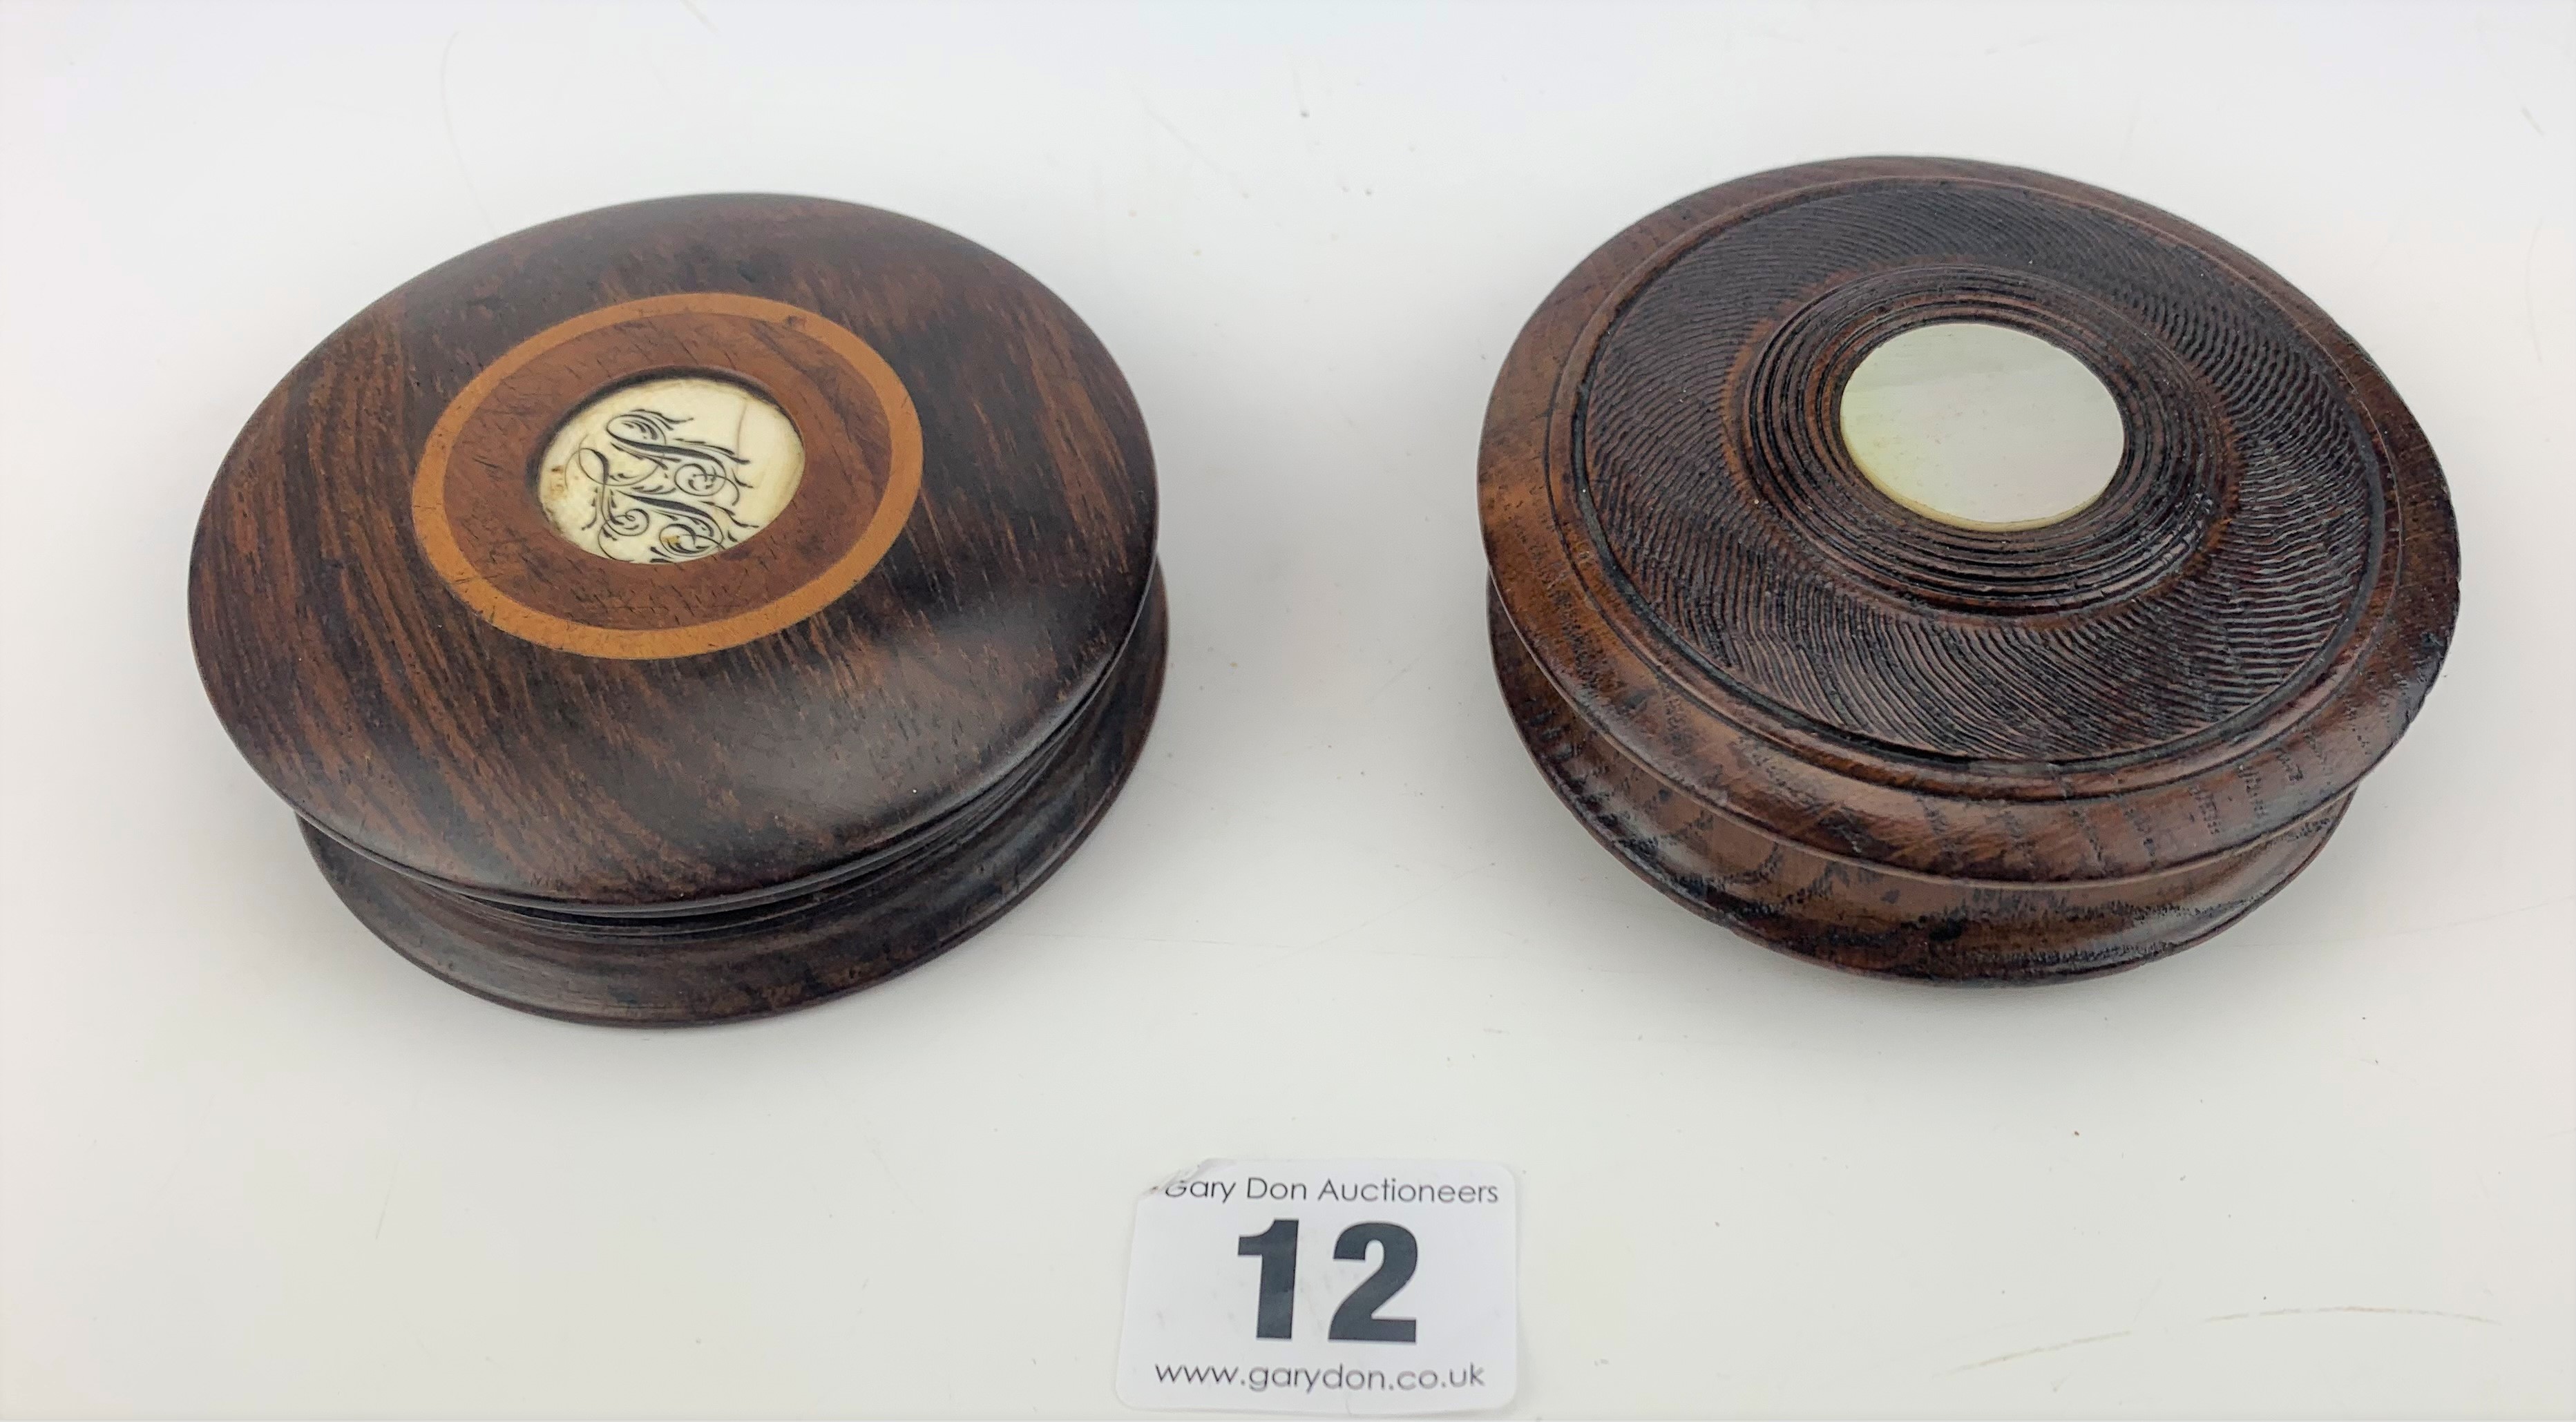 2 Georgian round wooden snuff boxes